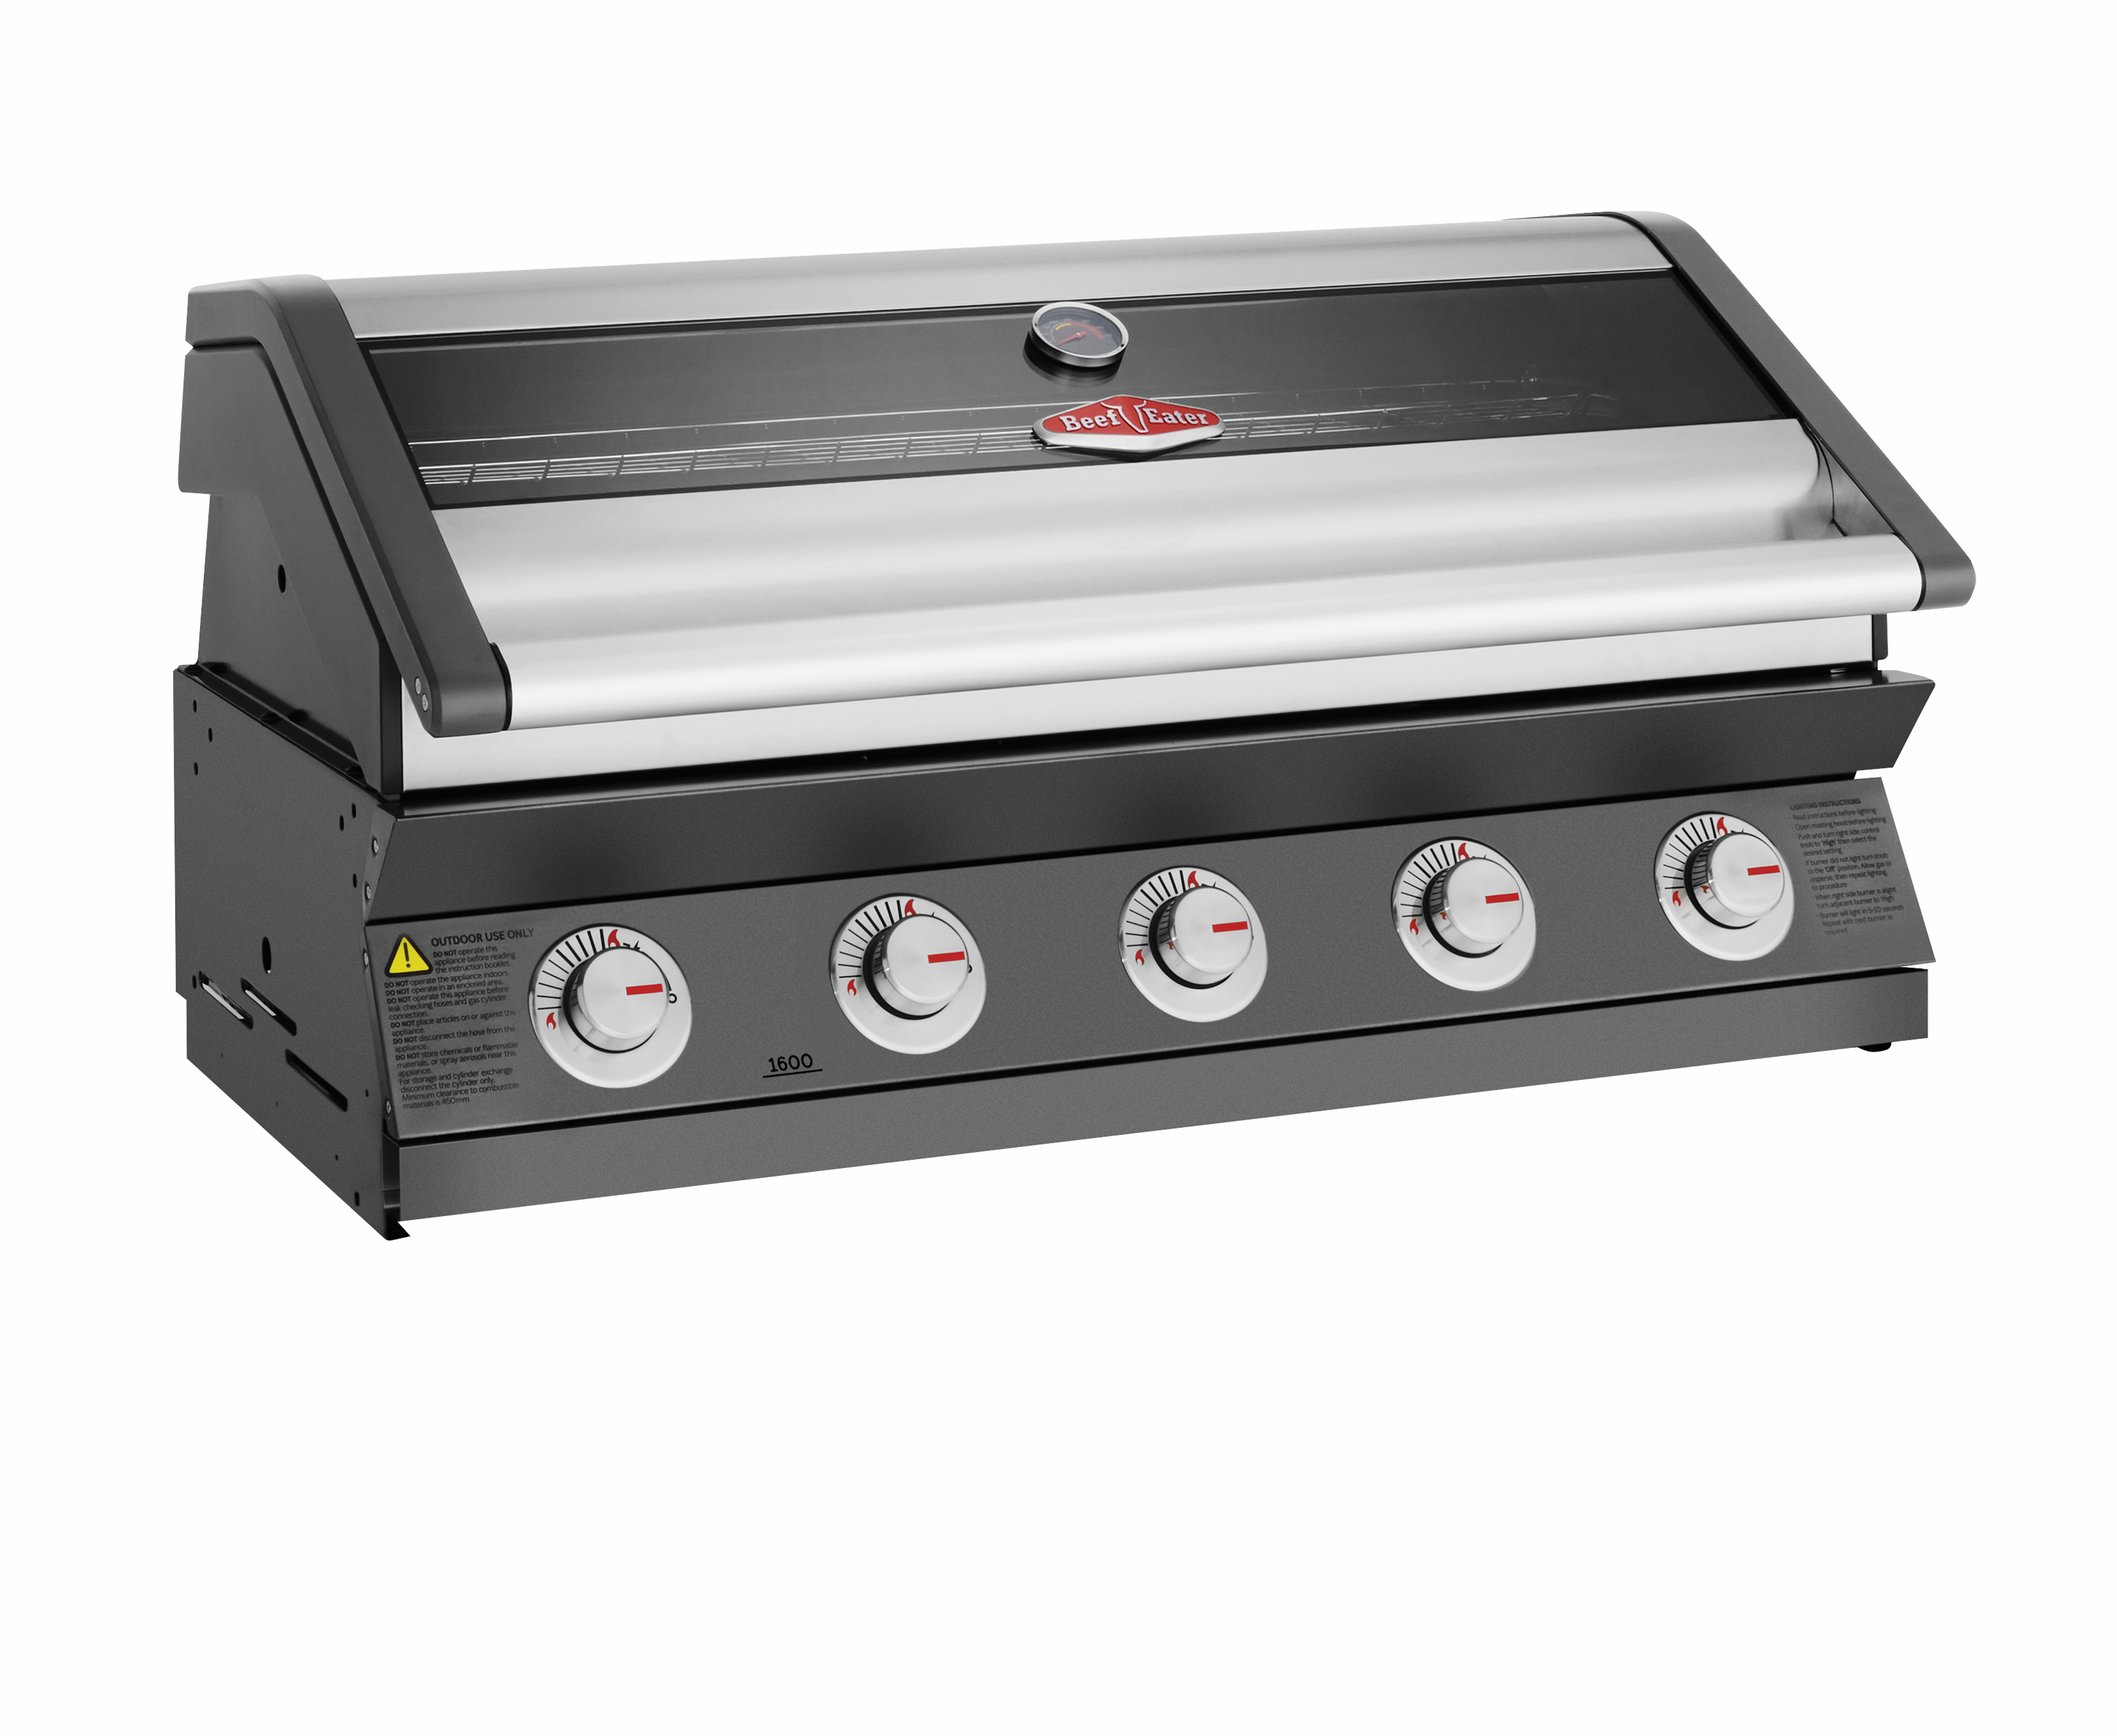 BeefEater - 1600E Series 5 Burner Built In Barbecue